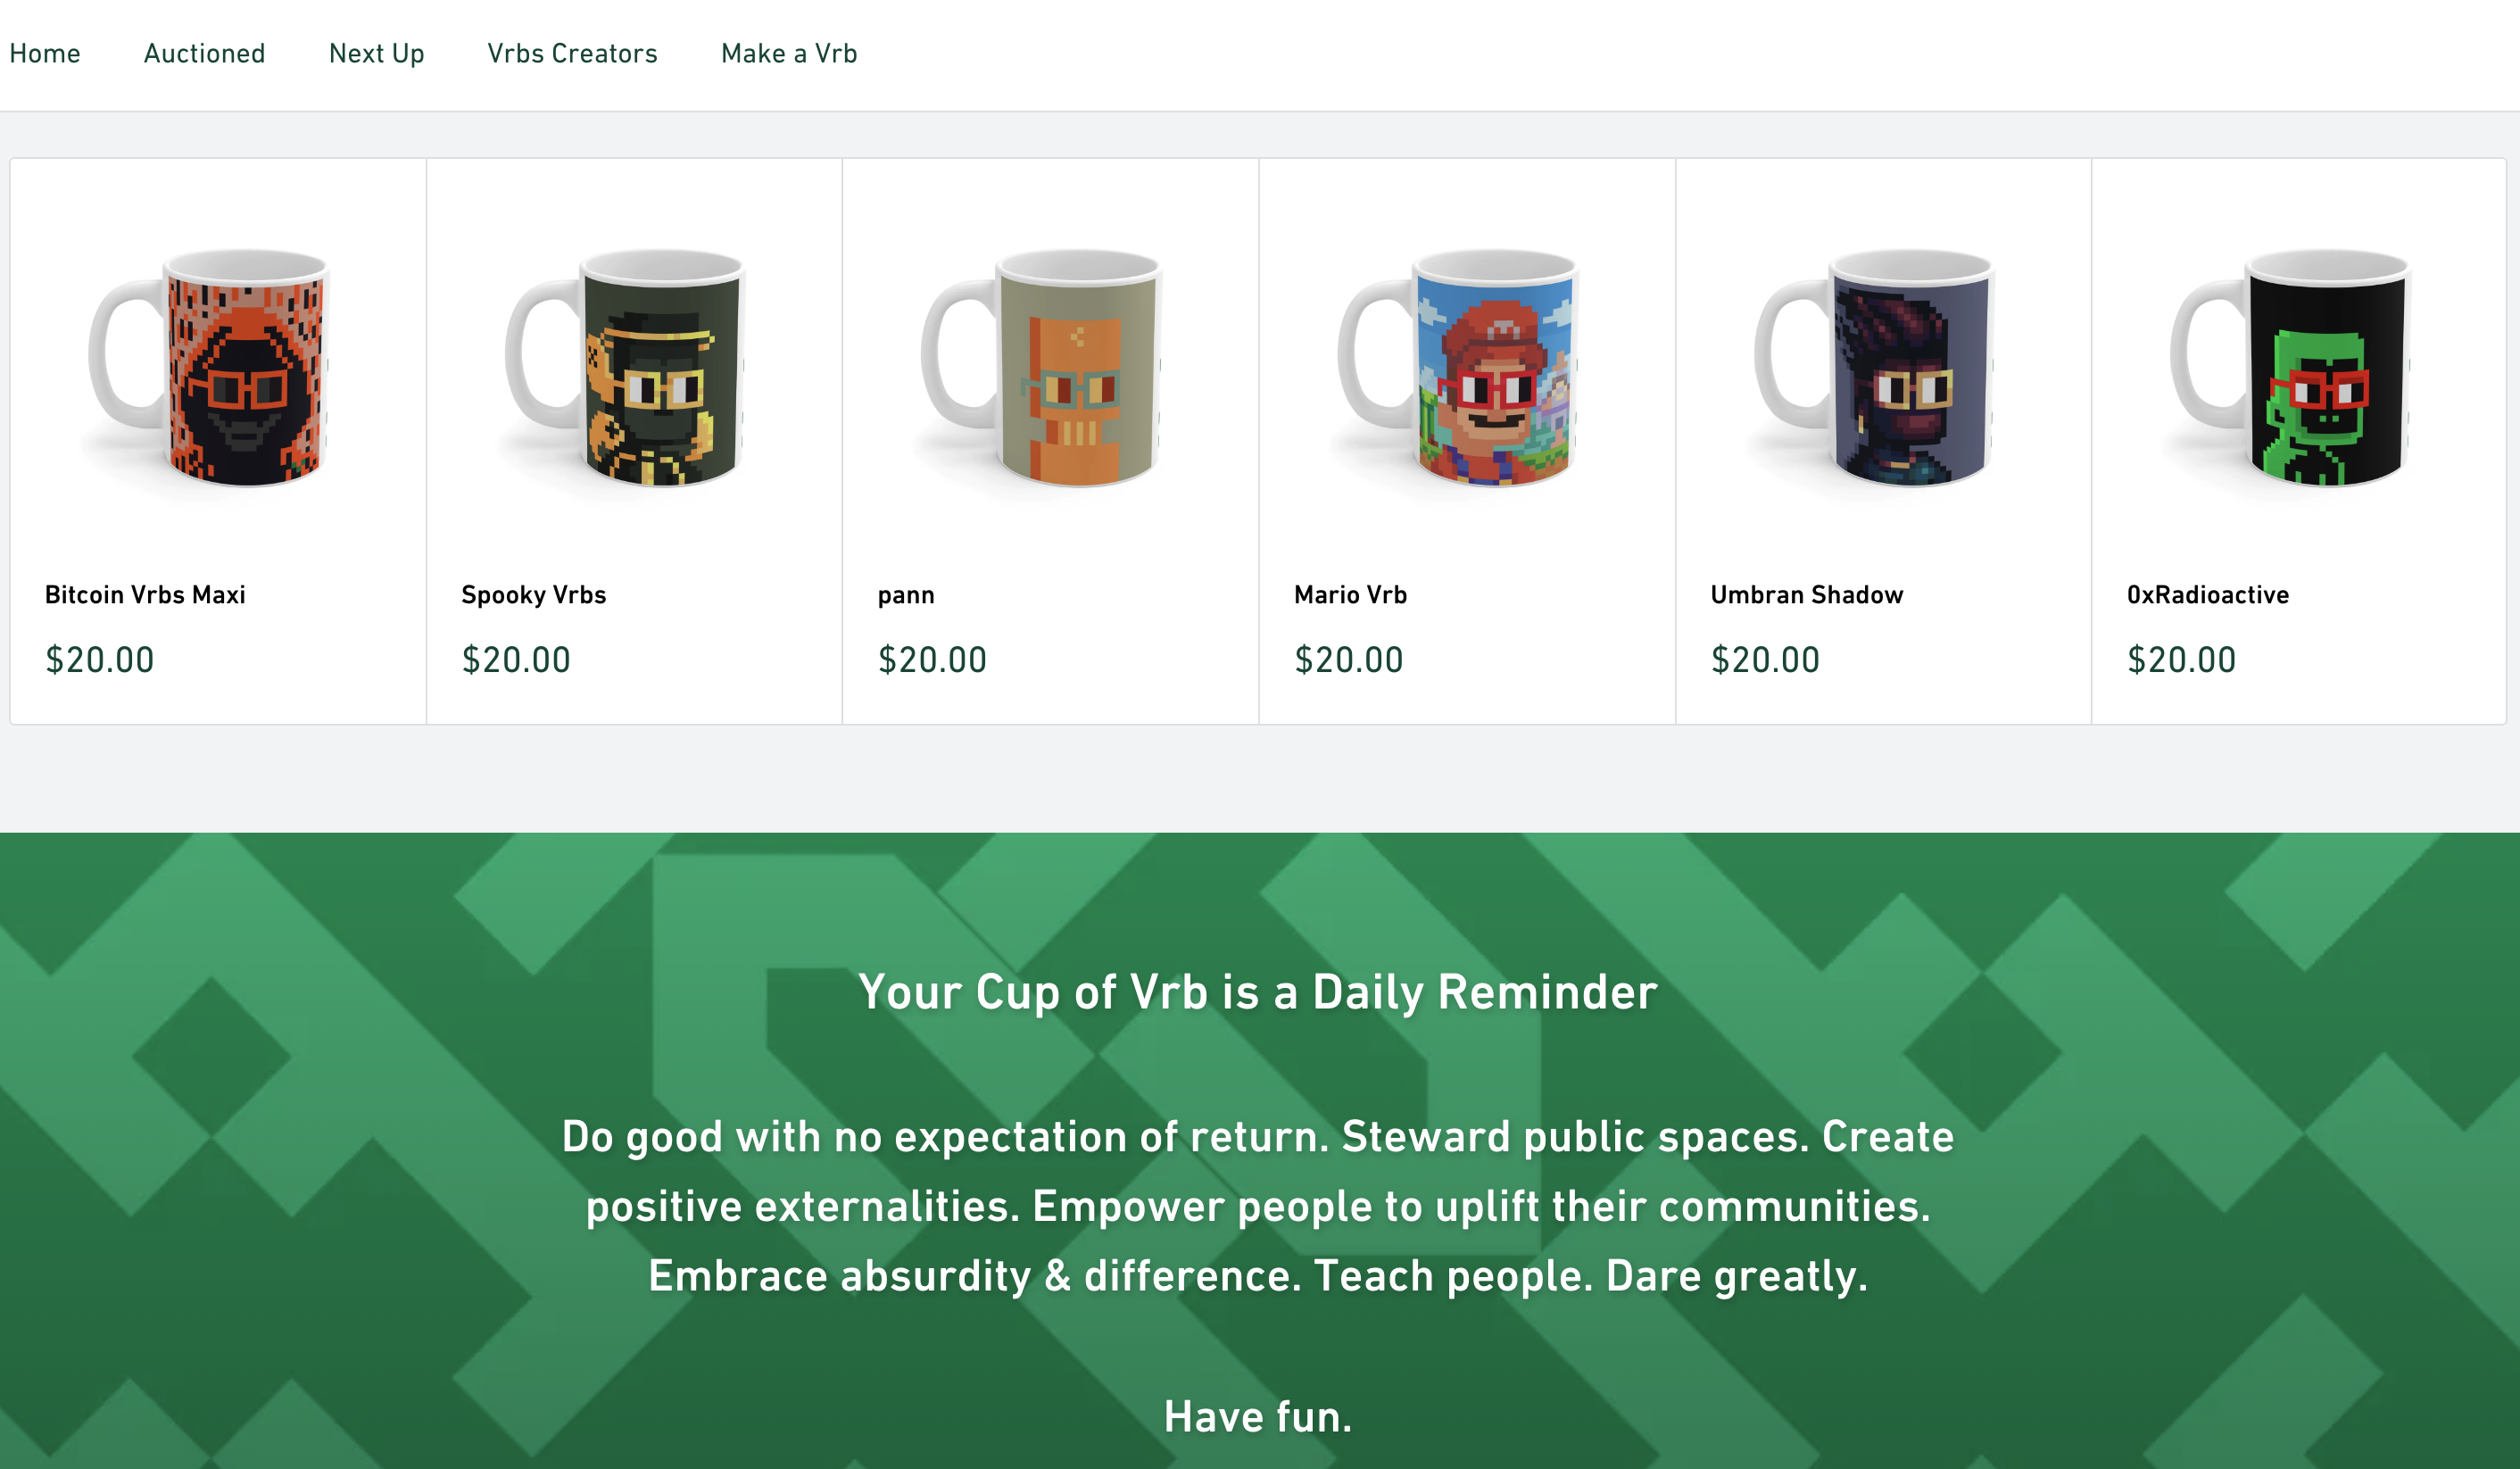 cupofvrb.com - a coffee cup shop that earns votes for Vrbs artists